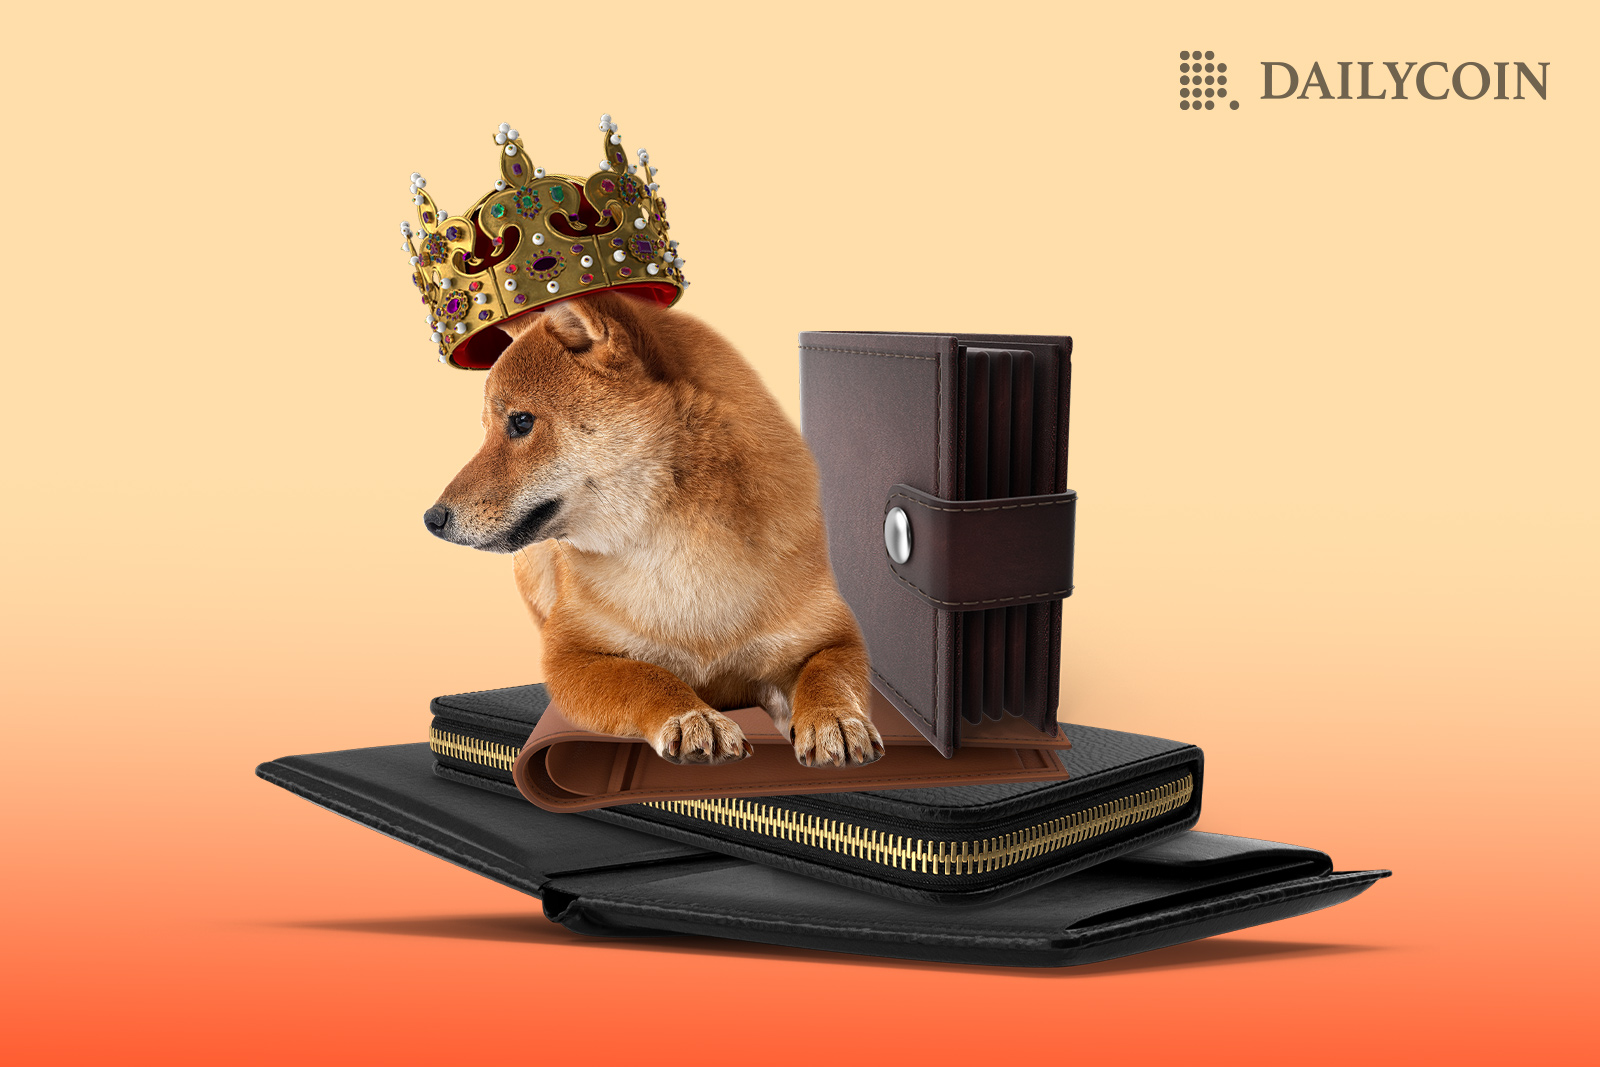 Shiba Inu wearing a crown sitting on top of crypto wallets.